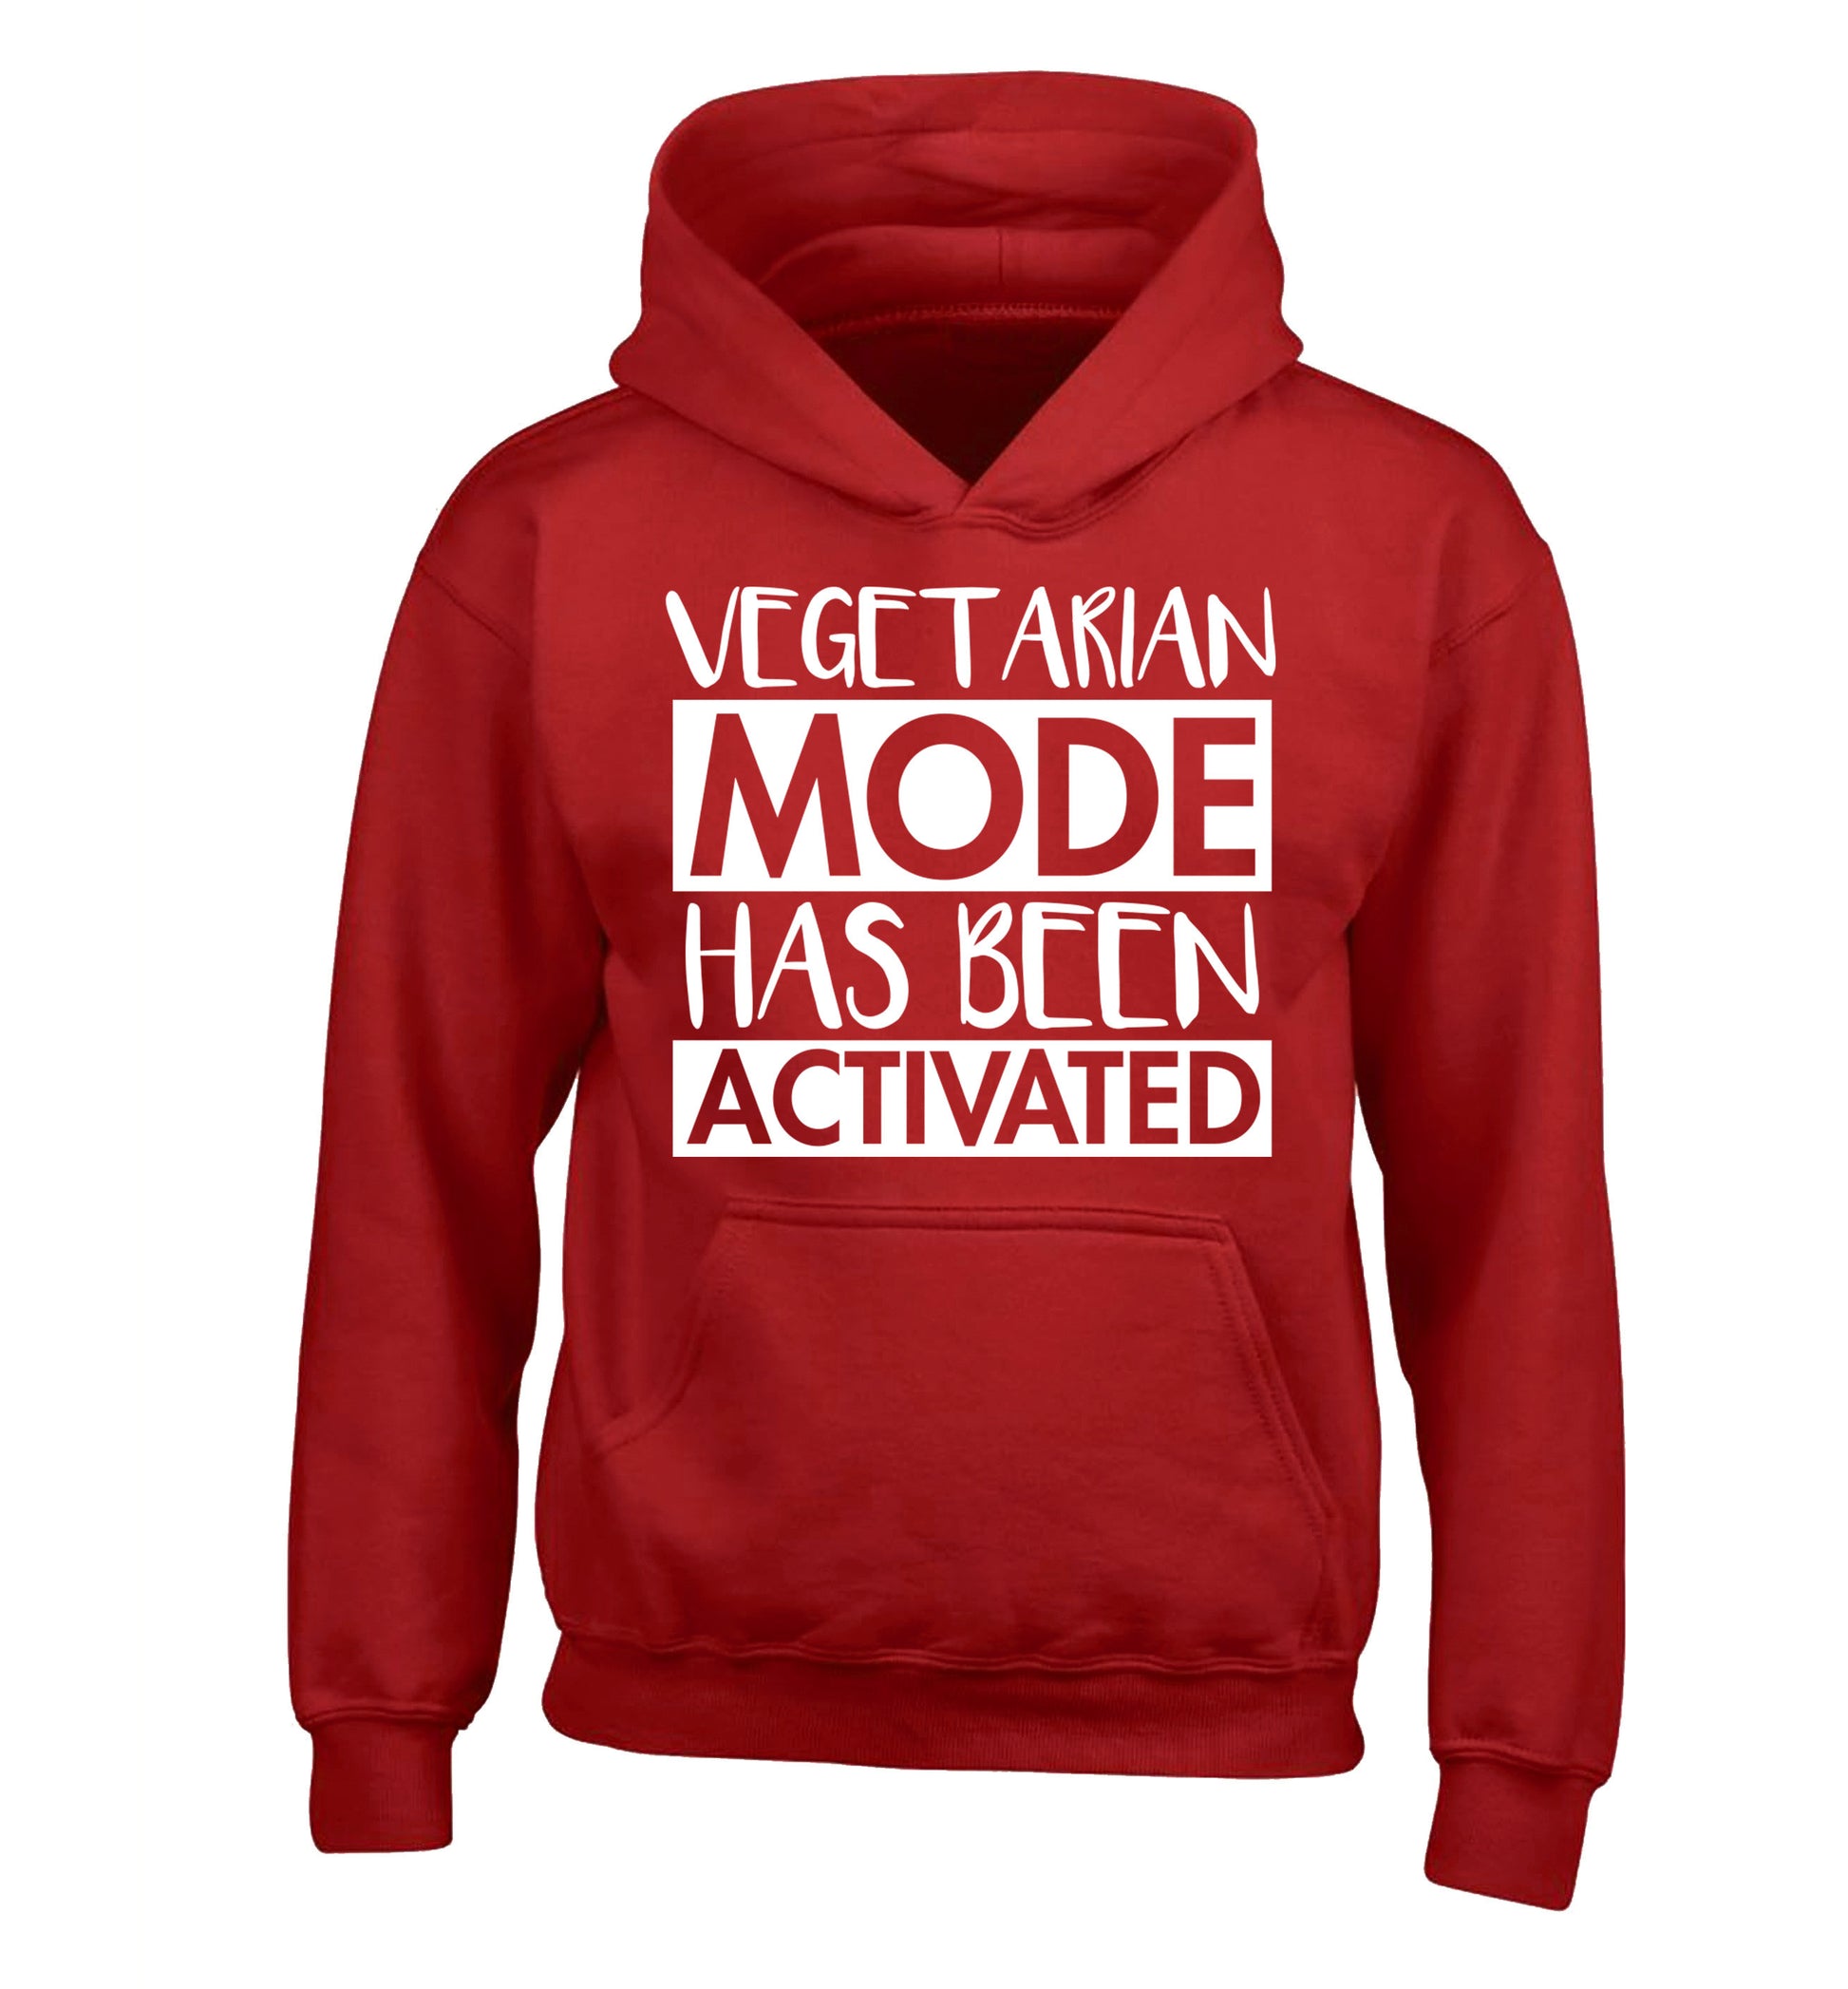 Vegetarian mode activated children's red hoodie 12-14 Years